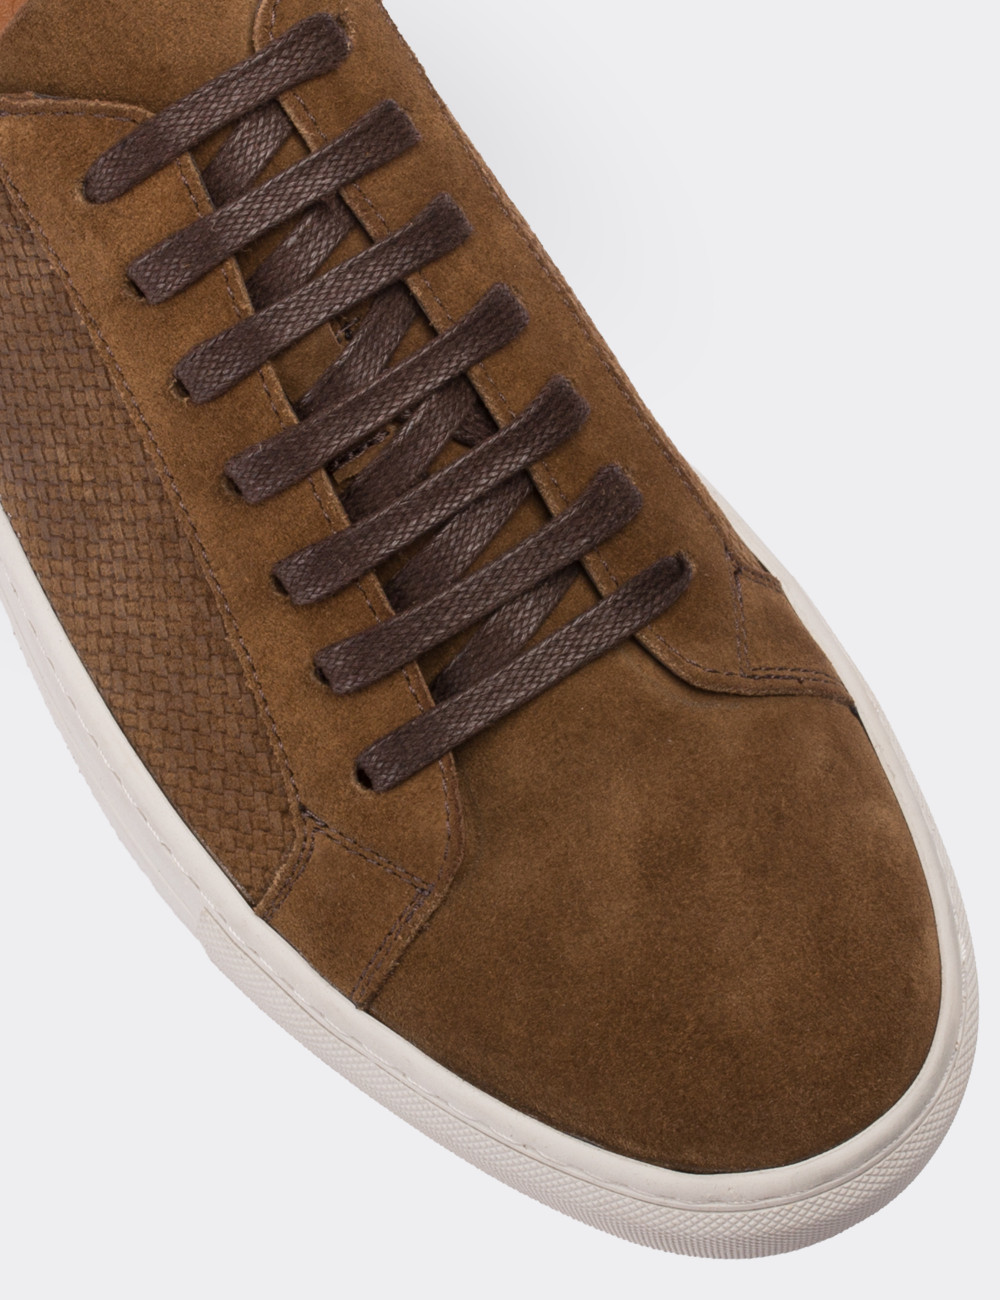 Brown Suede Leather Sneakers - 01681MKHVC01